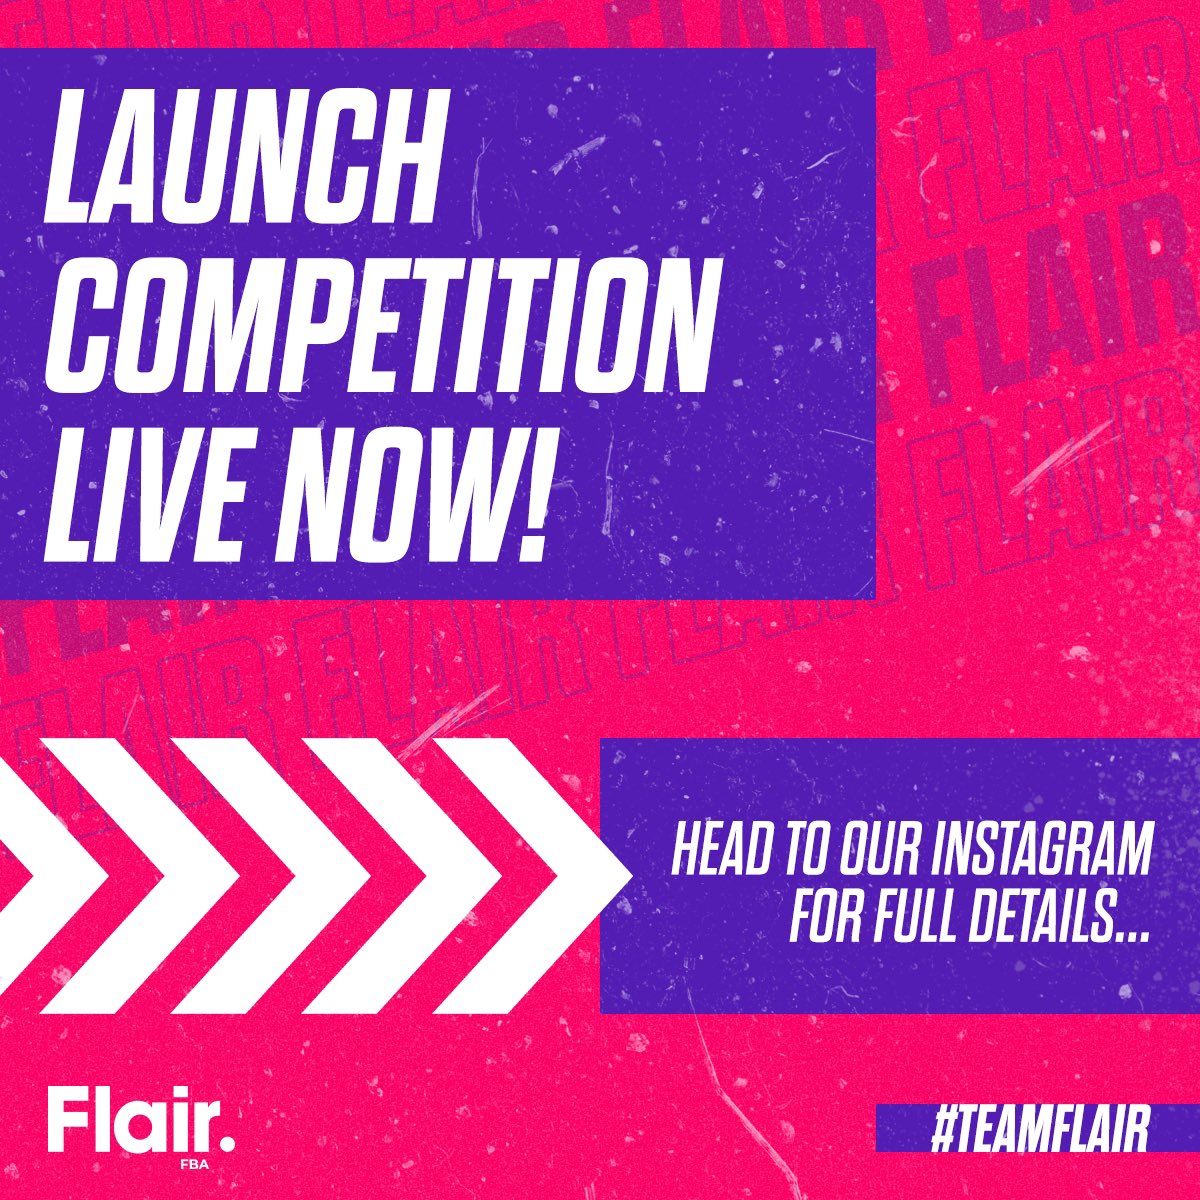 Let’s go then!!!!

Launch comp is now live. Head over to our Instagram for full details on how to enter. 

#TeamFlair 🔥🚀